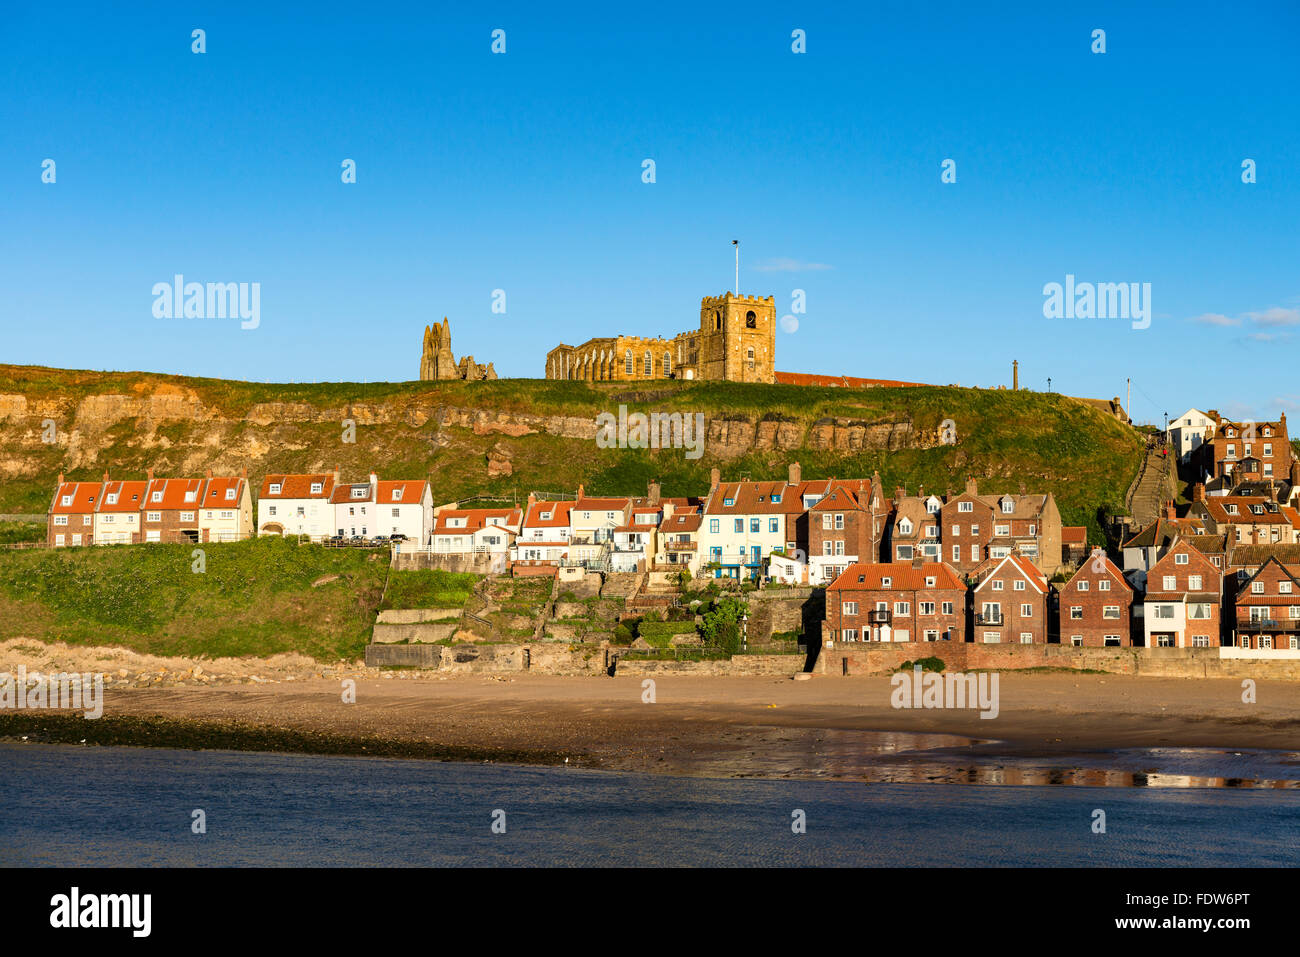 Whitby old town and St. Mary's church on a bright, sunny, summer's evening Stock Photo